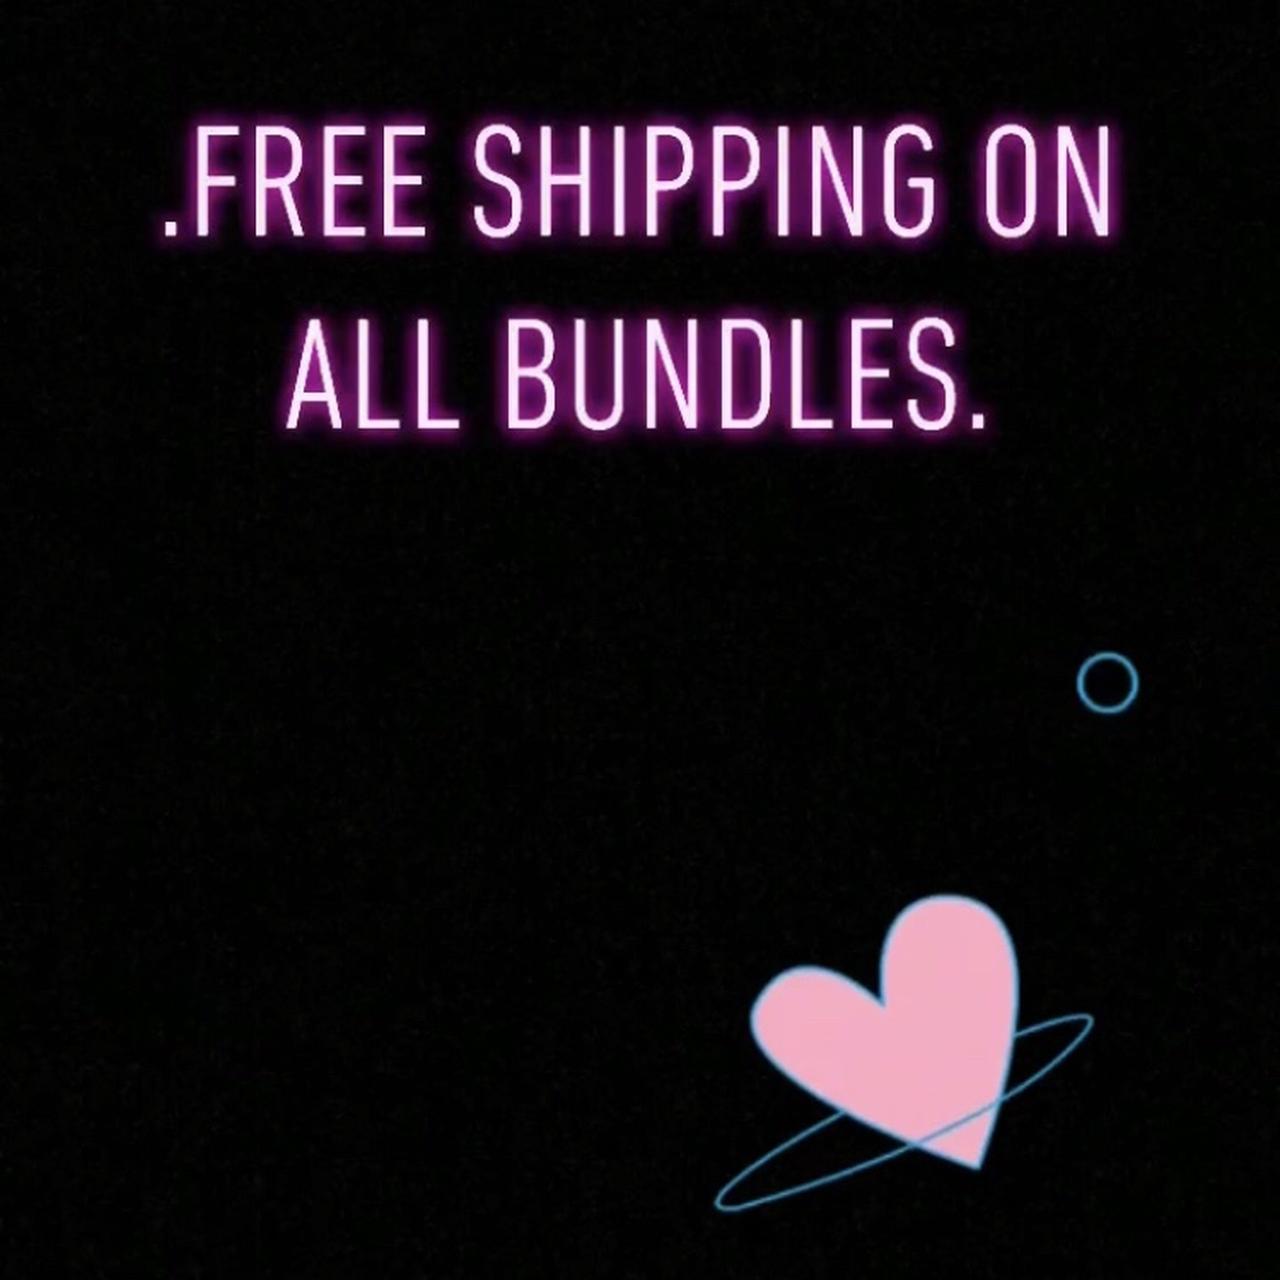 ✨🕊 FREE SHIPPING ON ALL BUNDLES 🕊✨ (Automatically - Depop